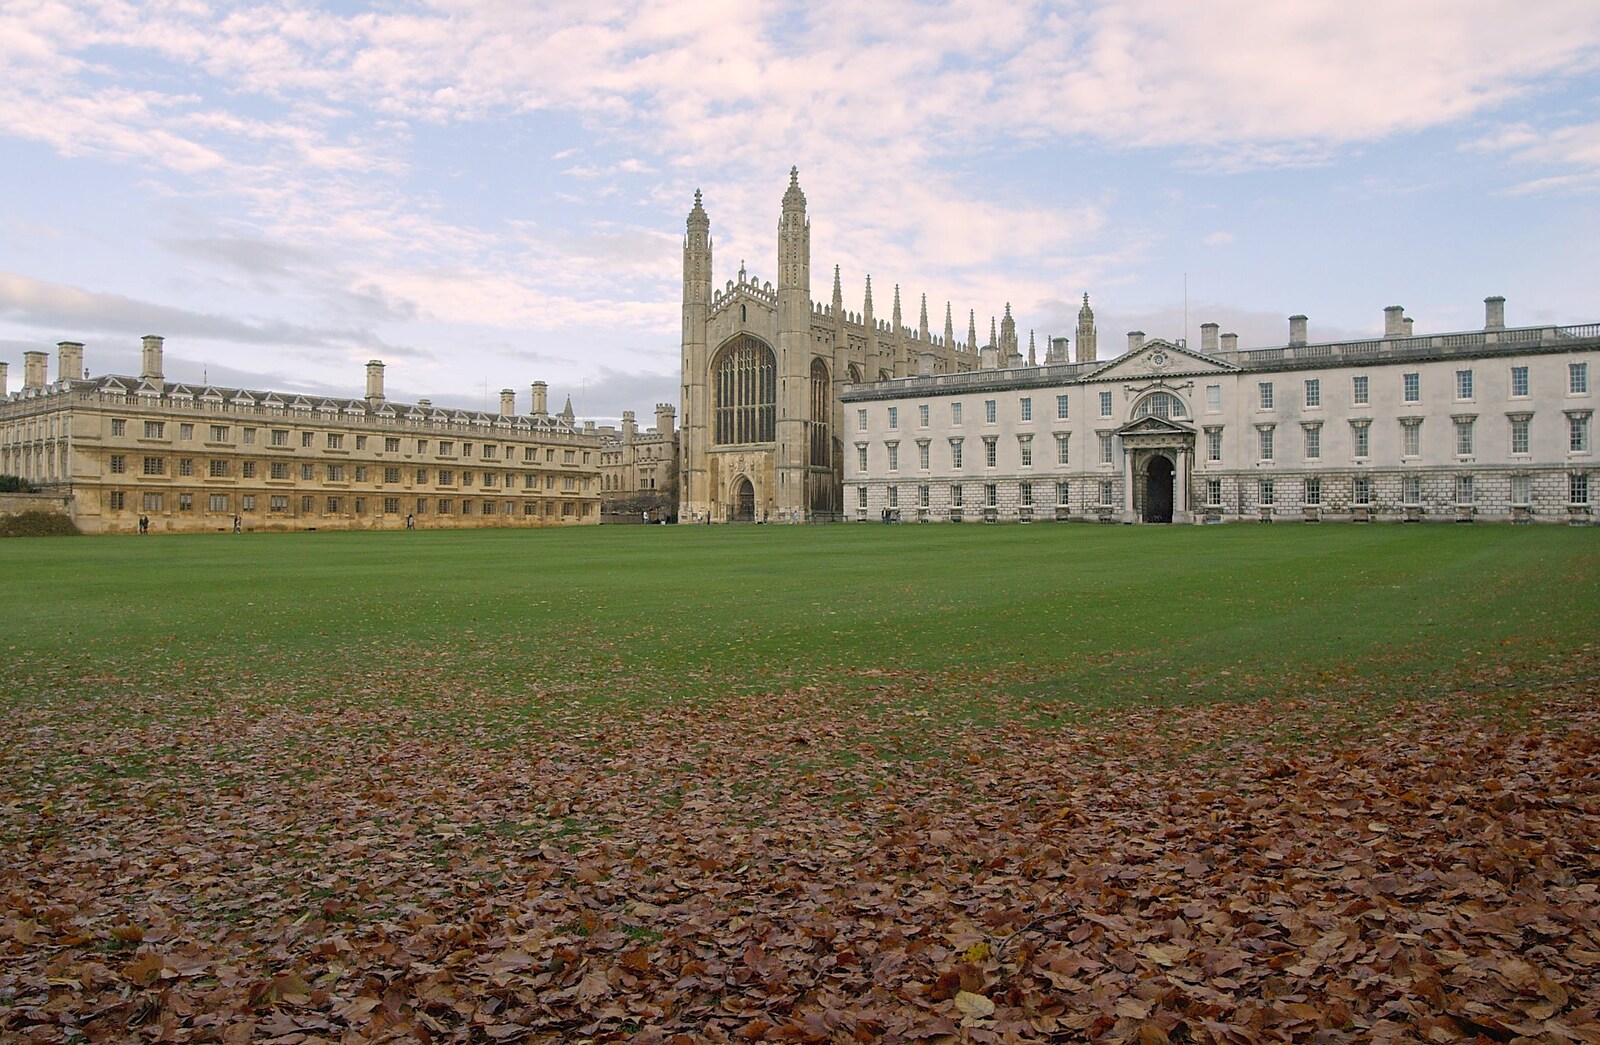 King's College Chapel, and dead autumn leaves from Autumn Colleges: a Wander around The Backs, Cambridge - 26th November